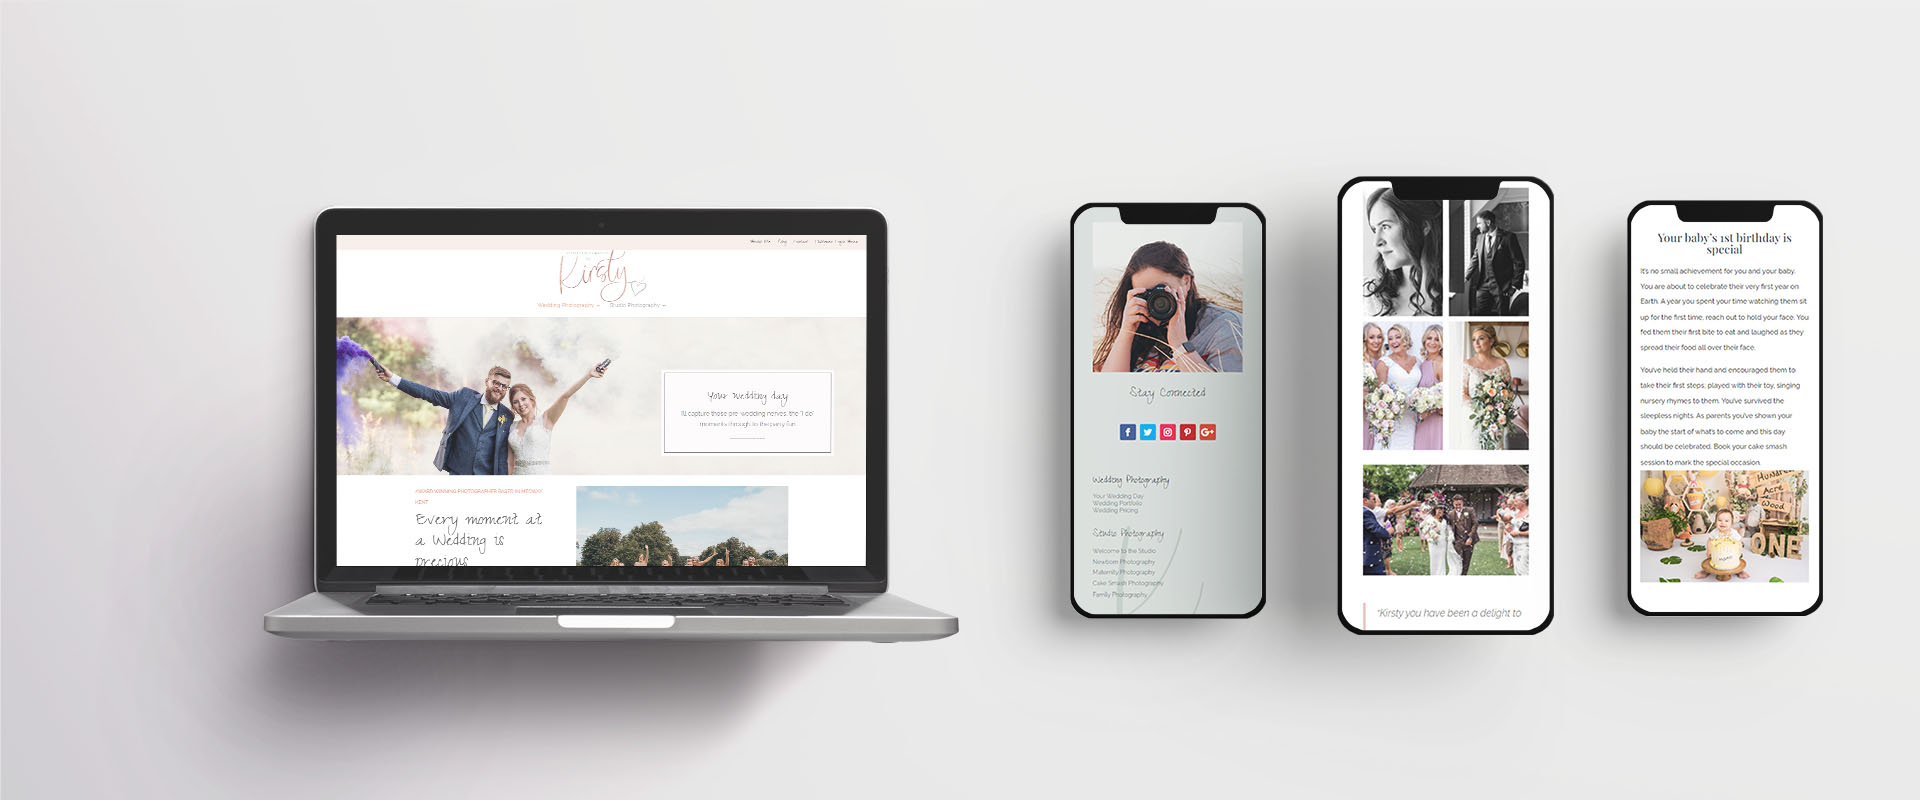 Kirsty Airey Wedding Photographer website designed by Digital Paw